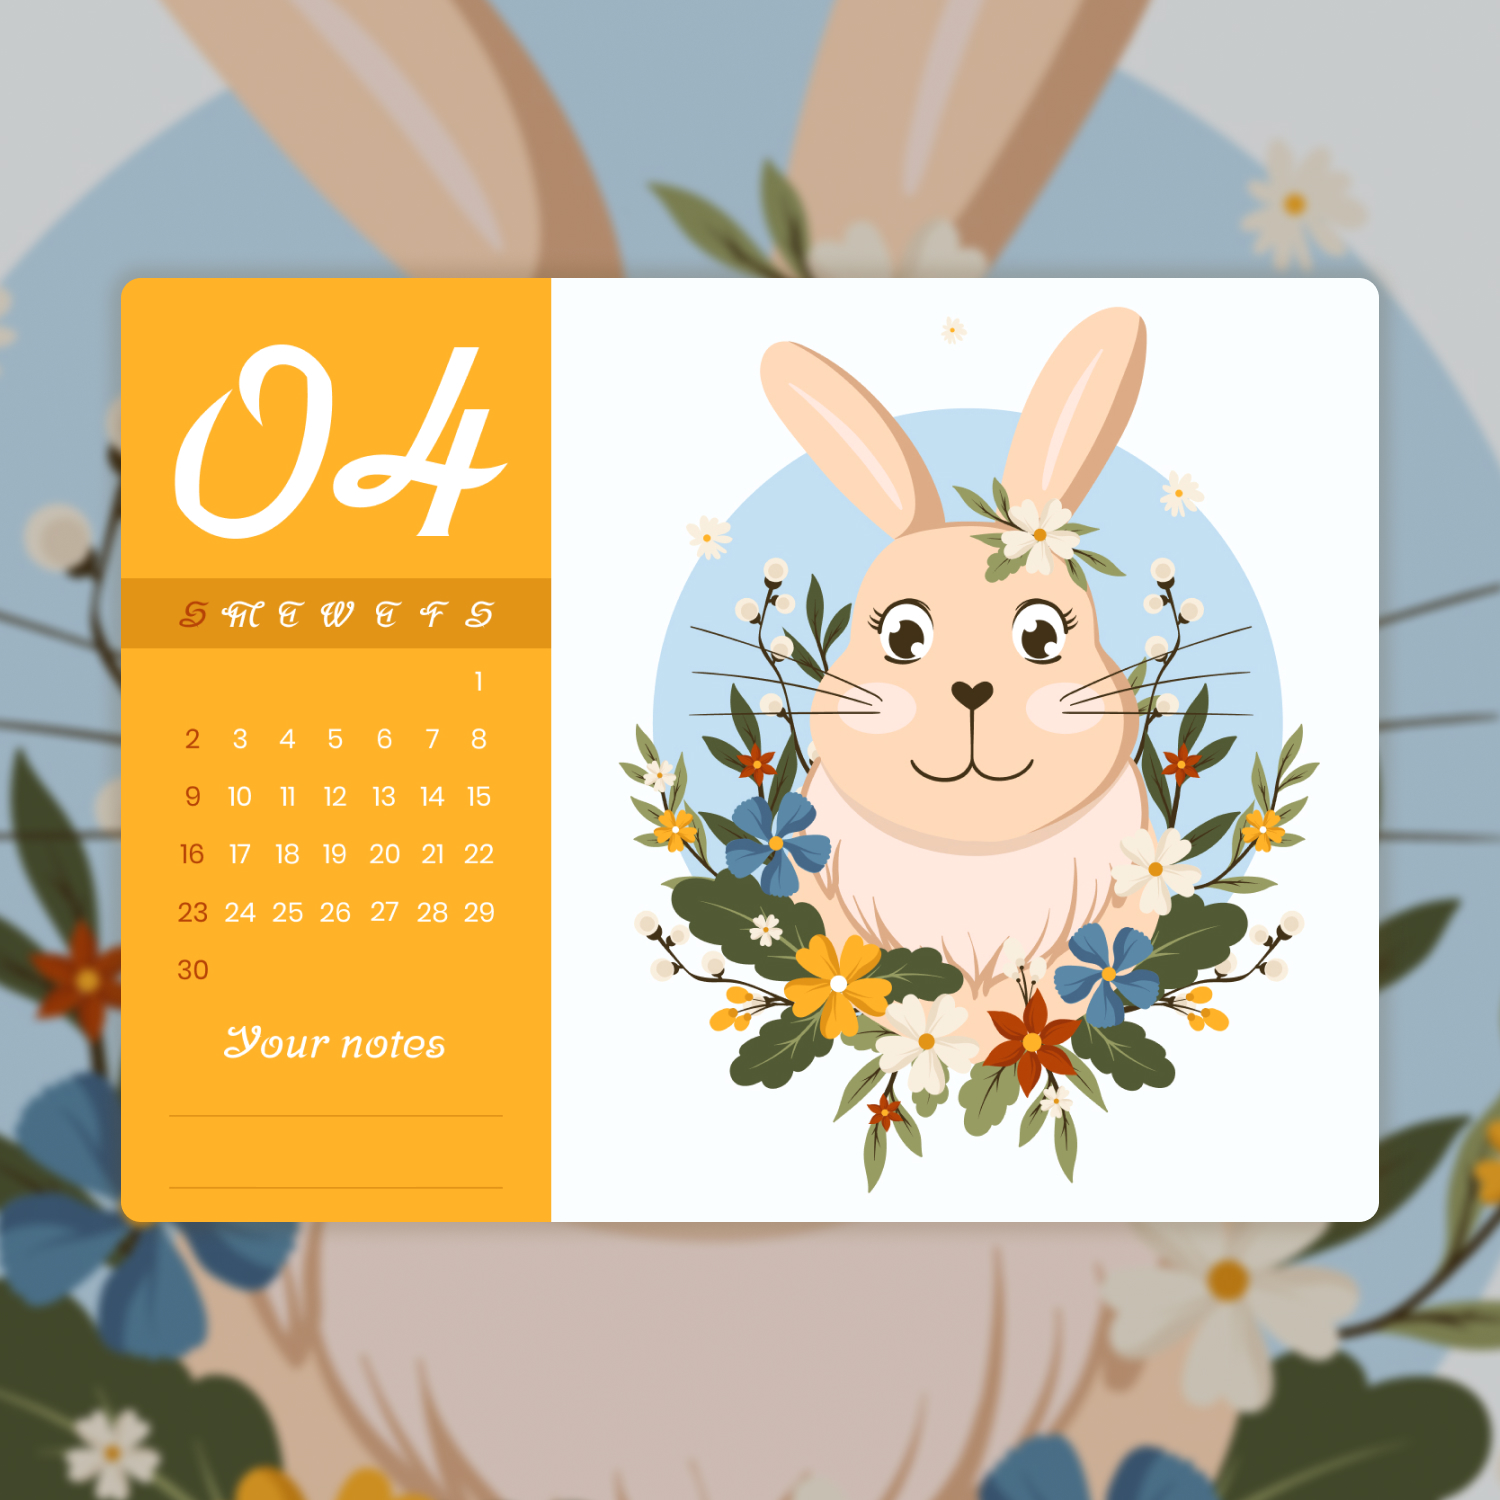 Calendar with a picture of a rabbit on it.